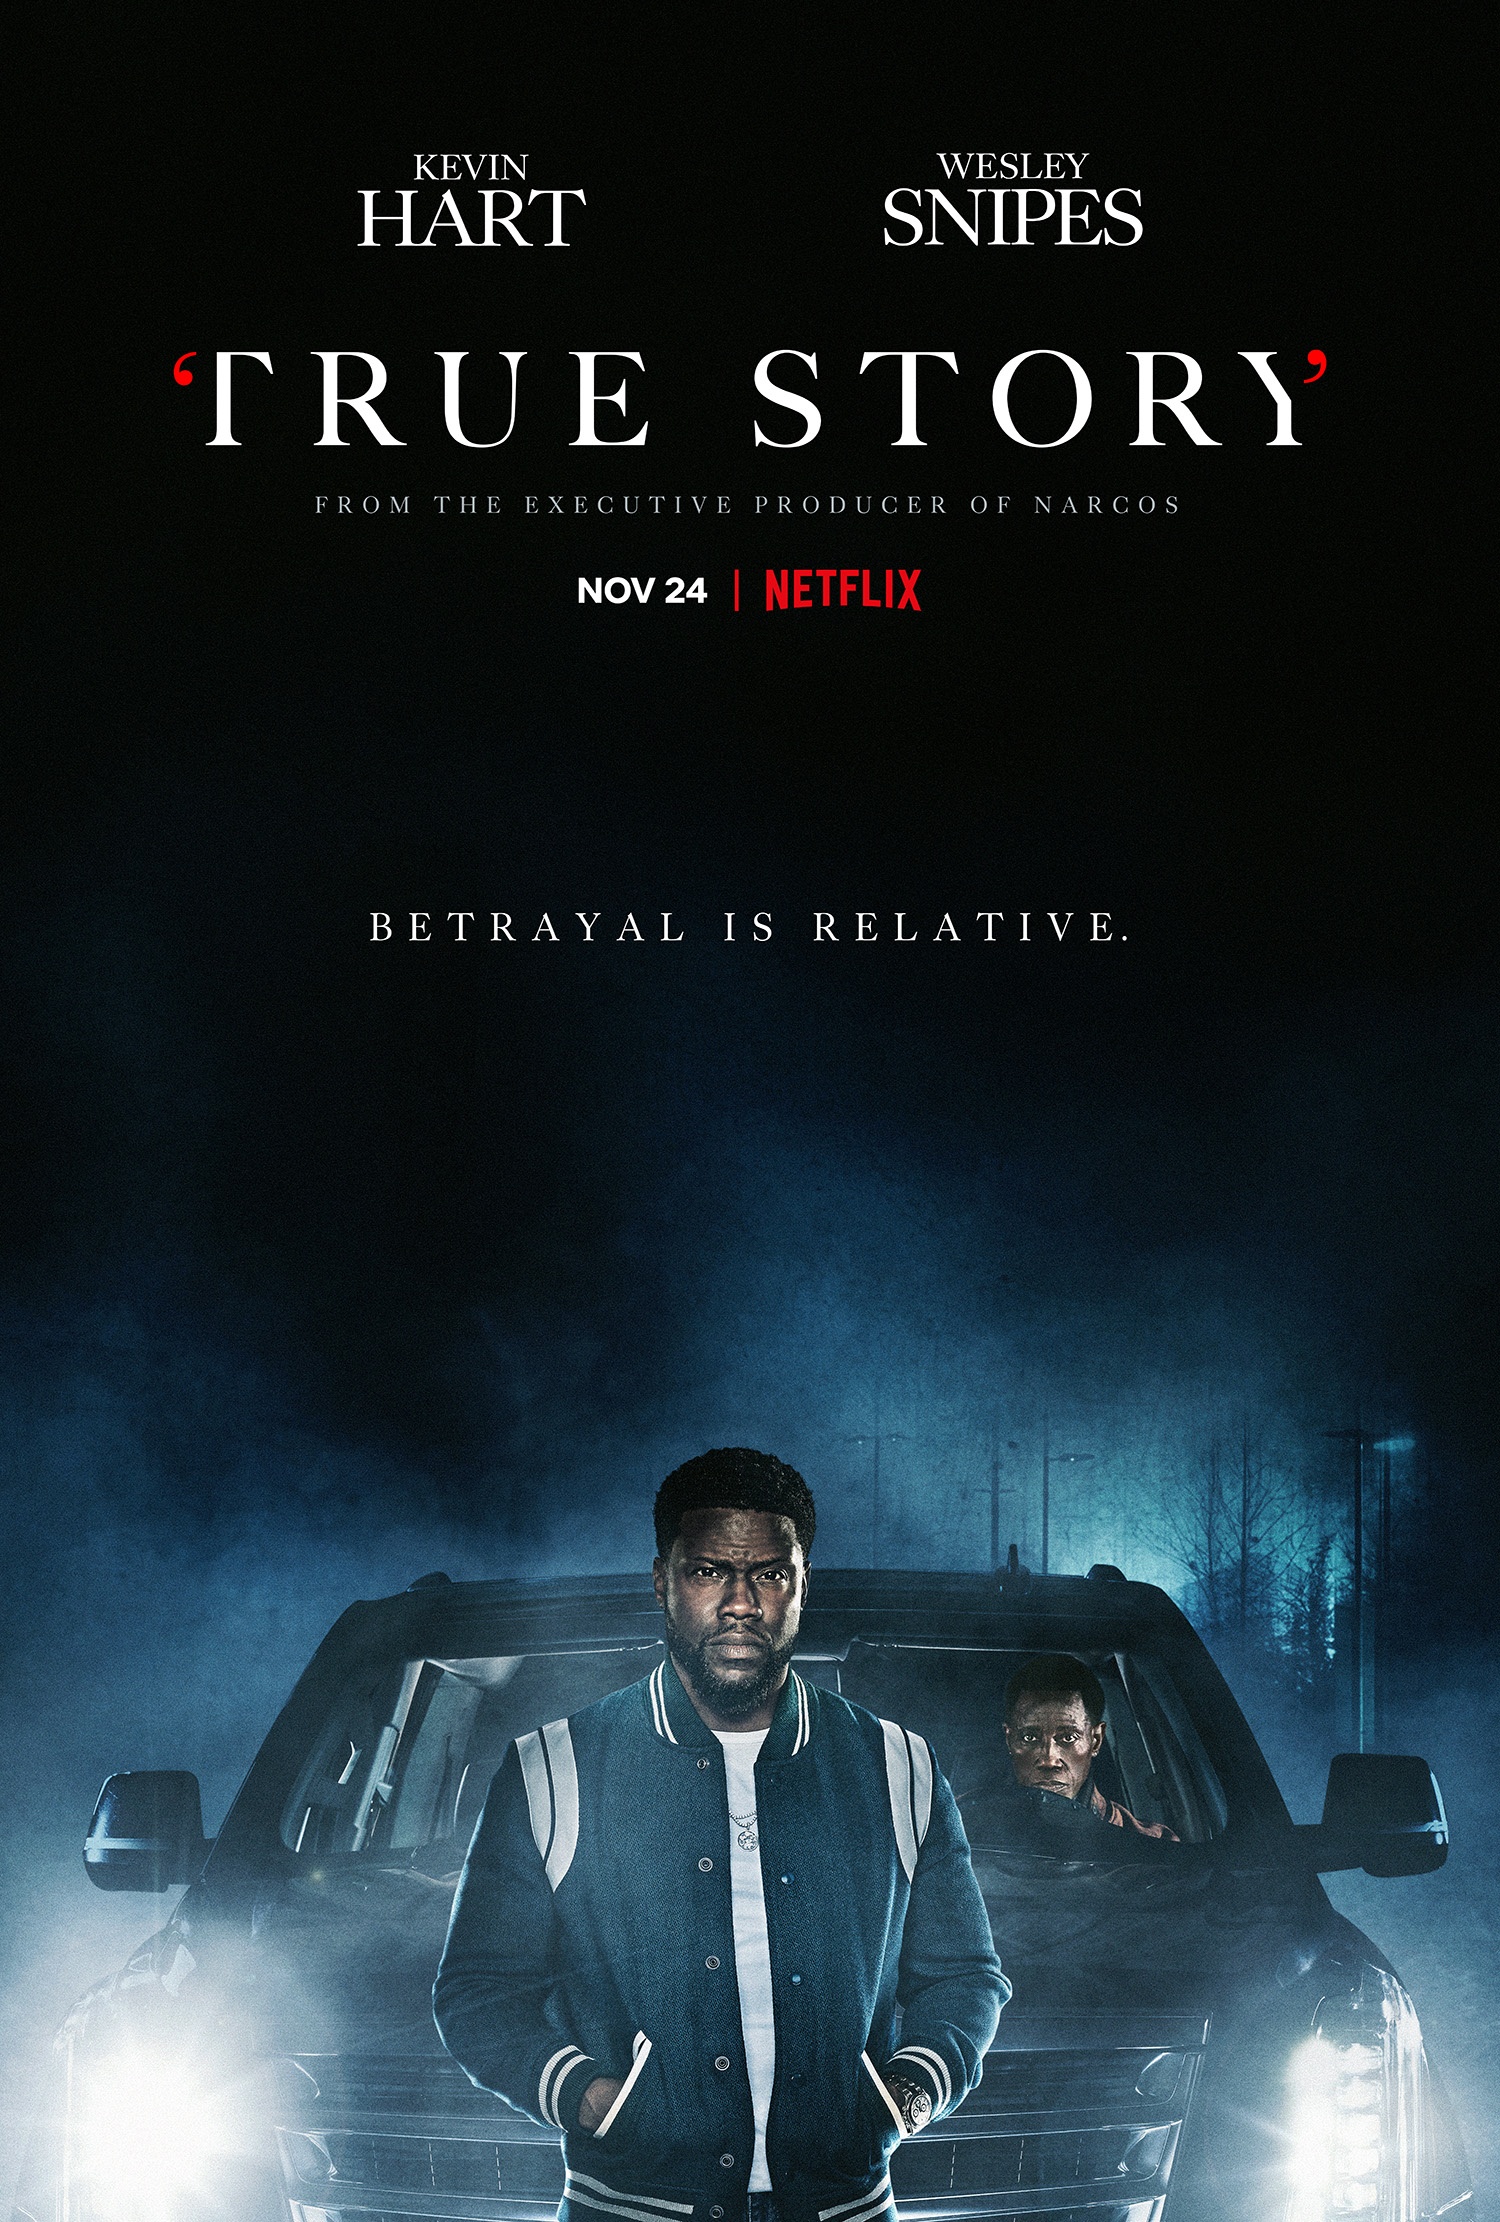 New Series: ‘True Story’ Starring Kevin Hart & Wesley Snipes